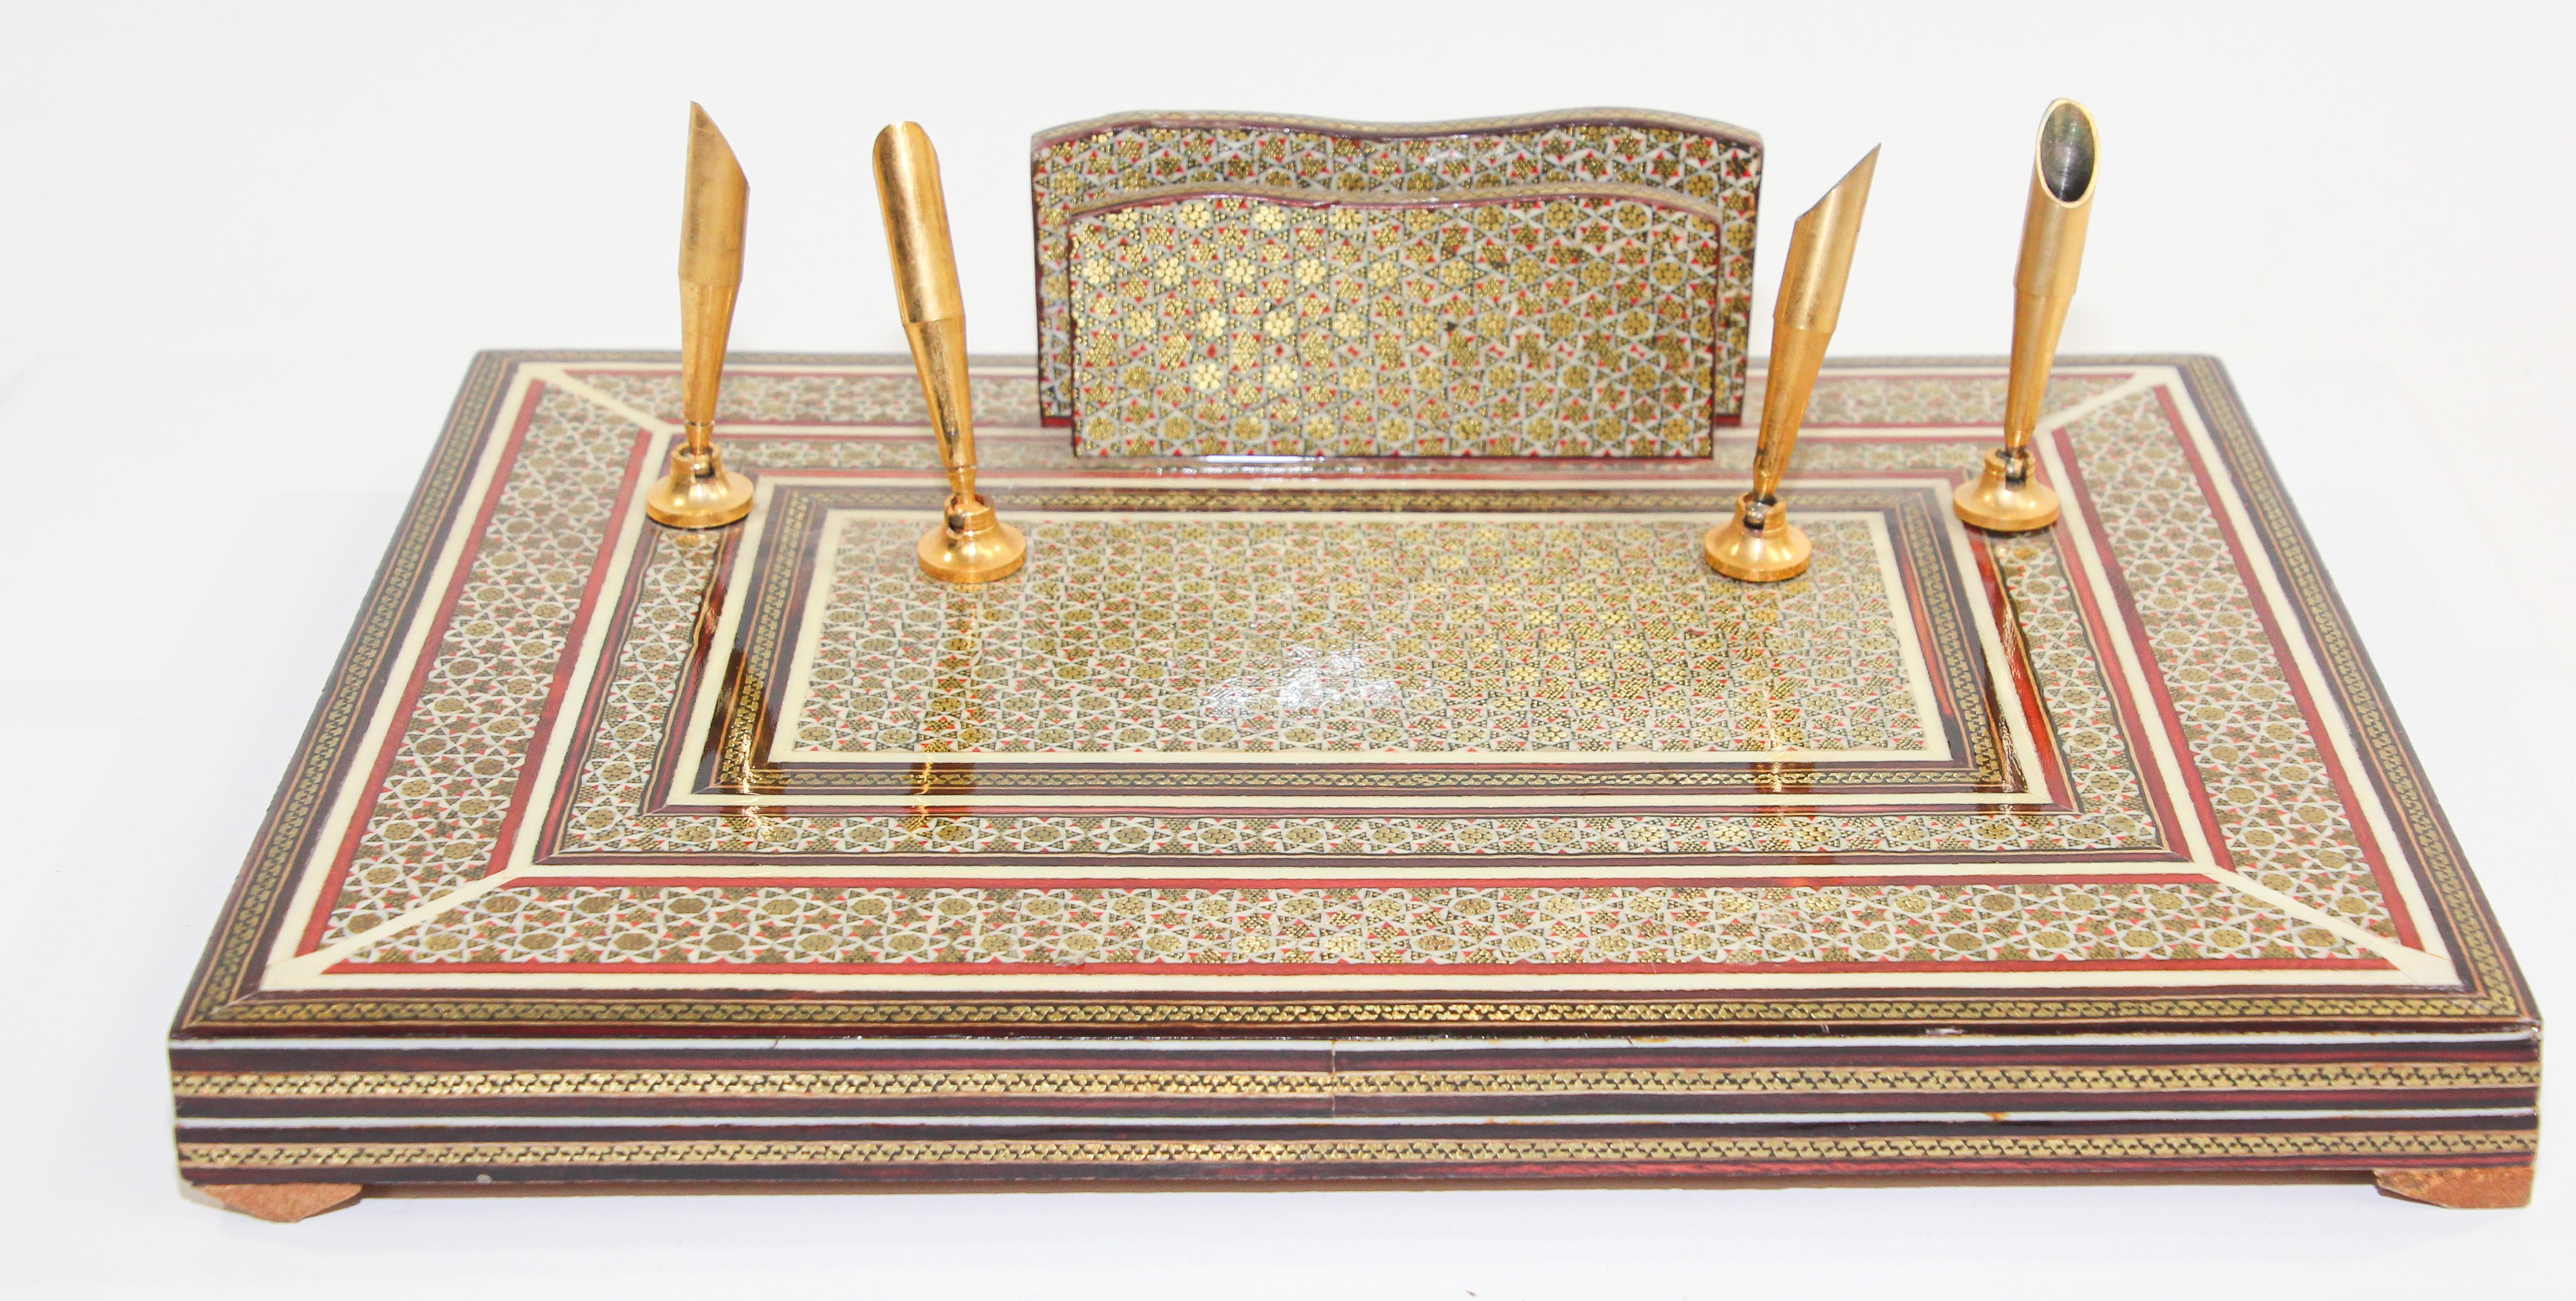 This is a vintage Persian style letter and penholder with 4 brass tips pen holder.
The wooden base is khatam inlaid micro mosaic.
It is solid and in very good condition for age. 
Nice Moorish decorative item on desk top.
Khatam is a Persian